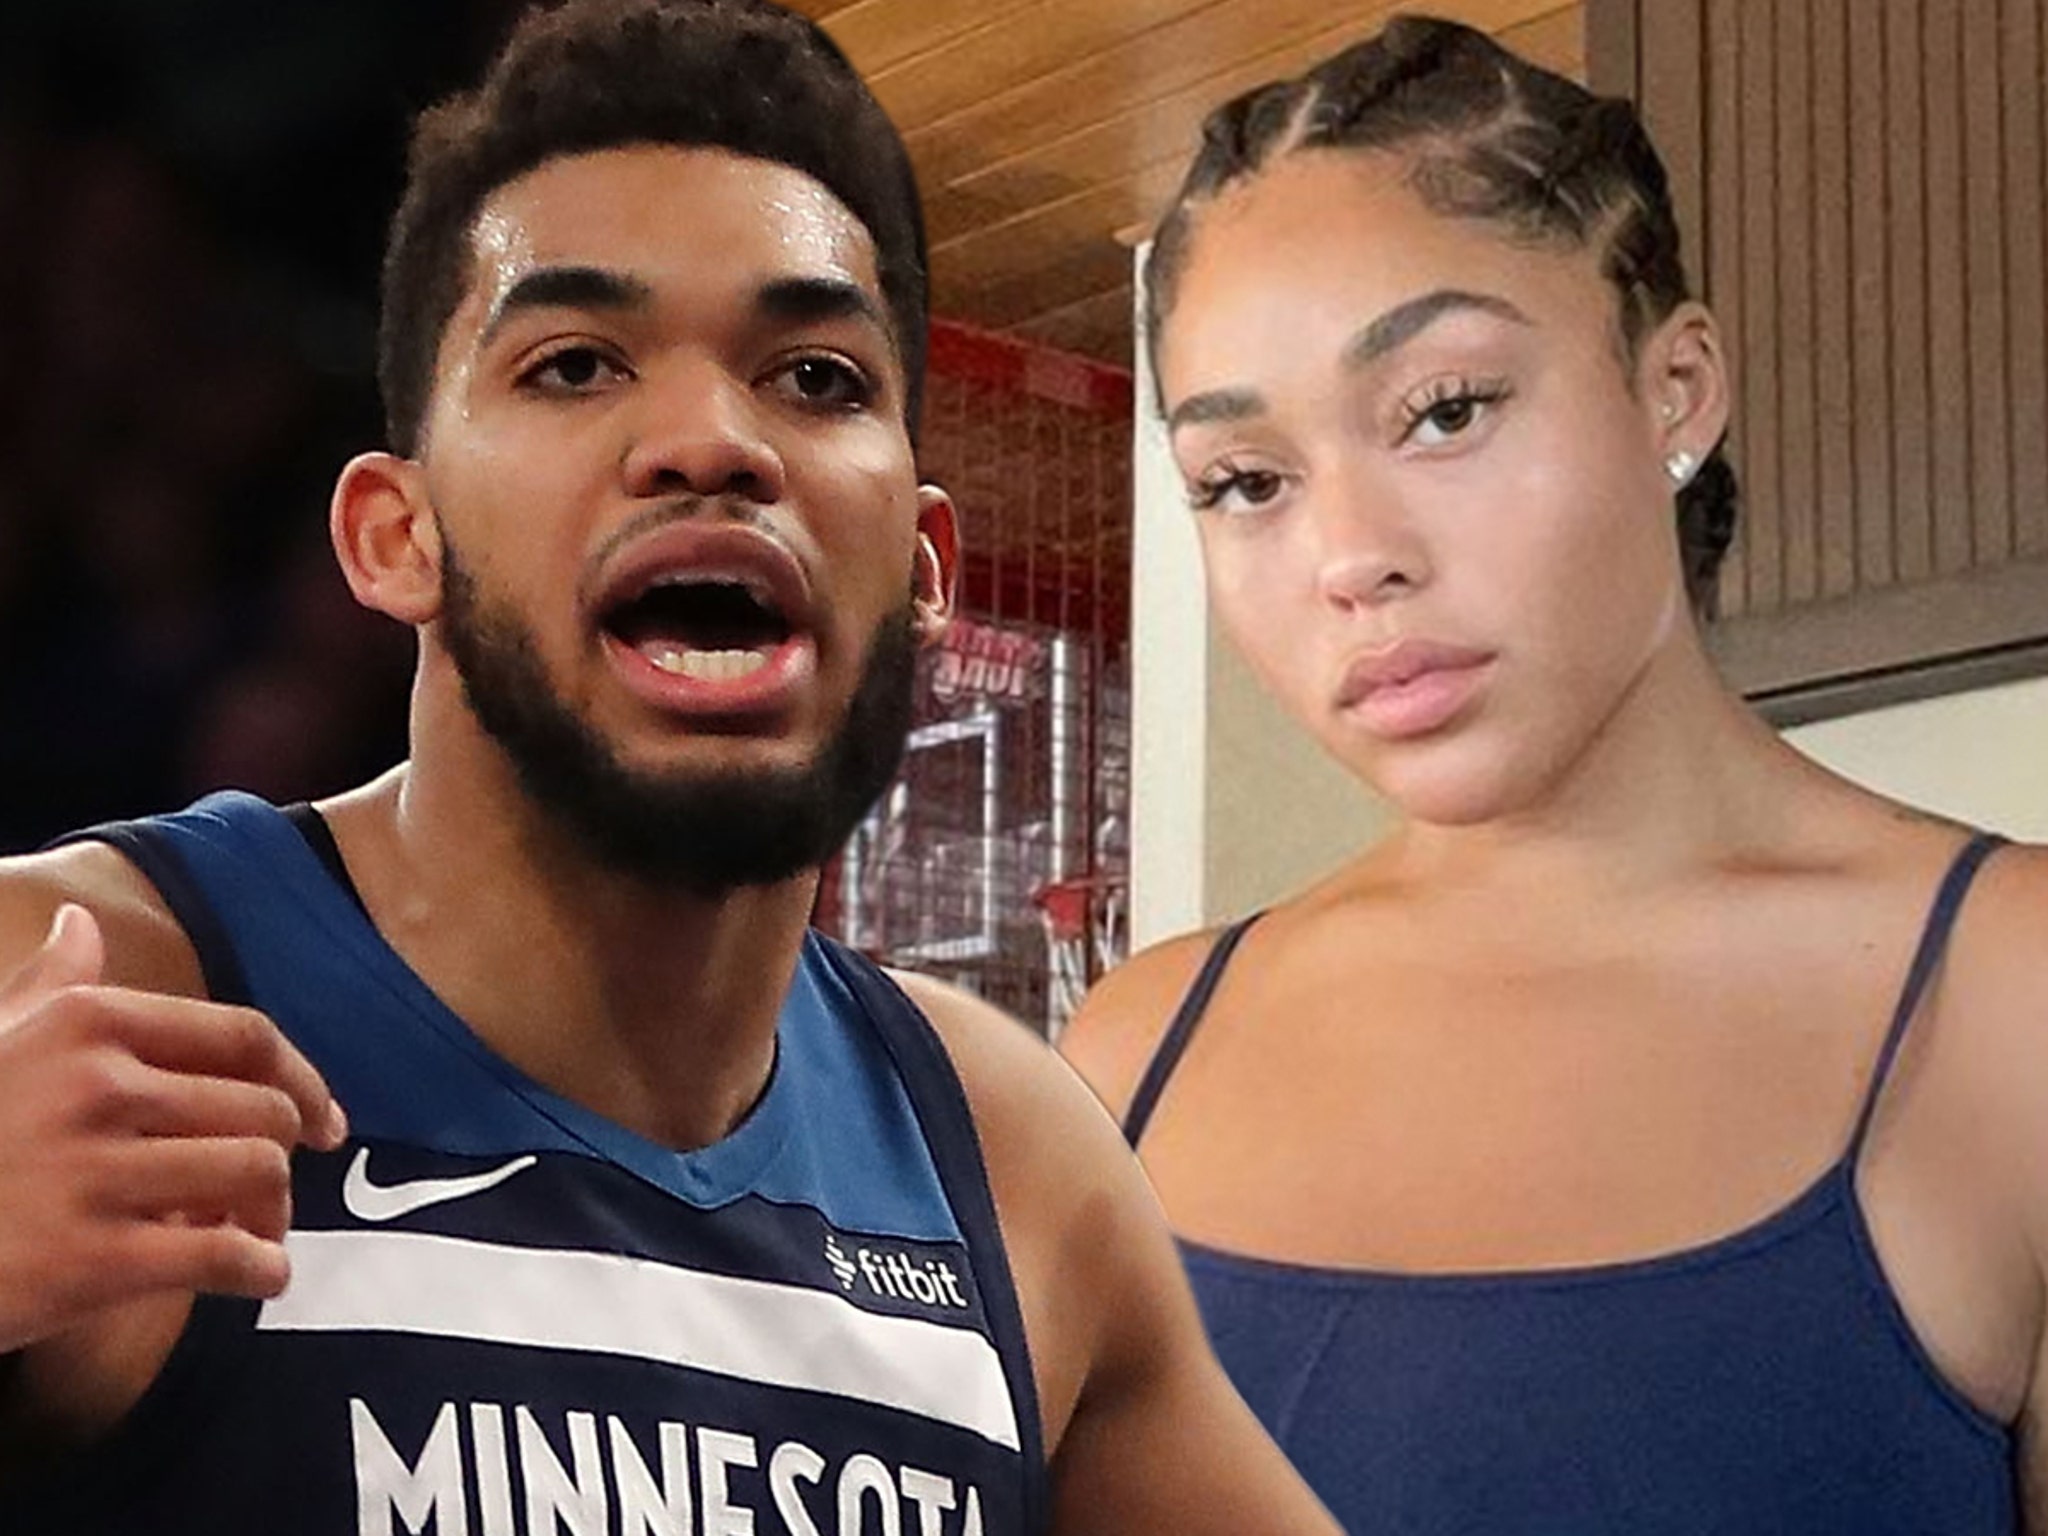 Body Sculpted from Hardwork': Fans Rush to Defend Jordyn Woods